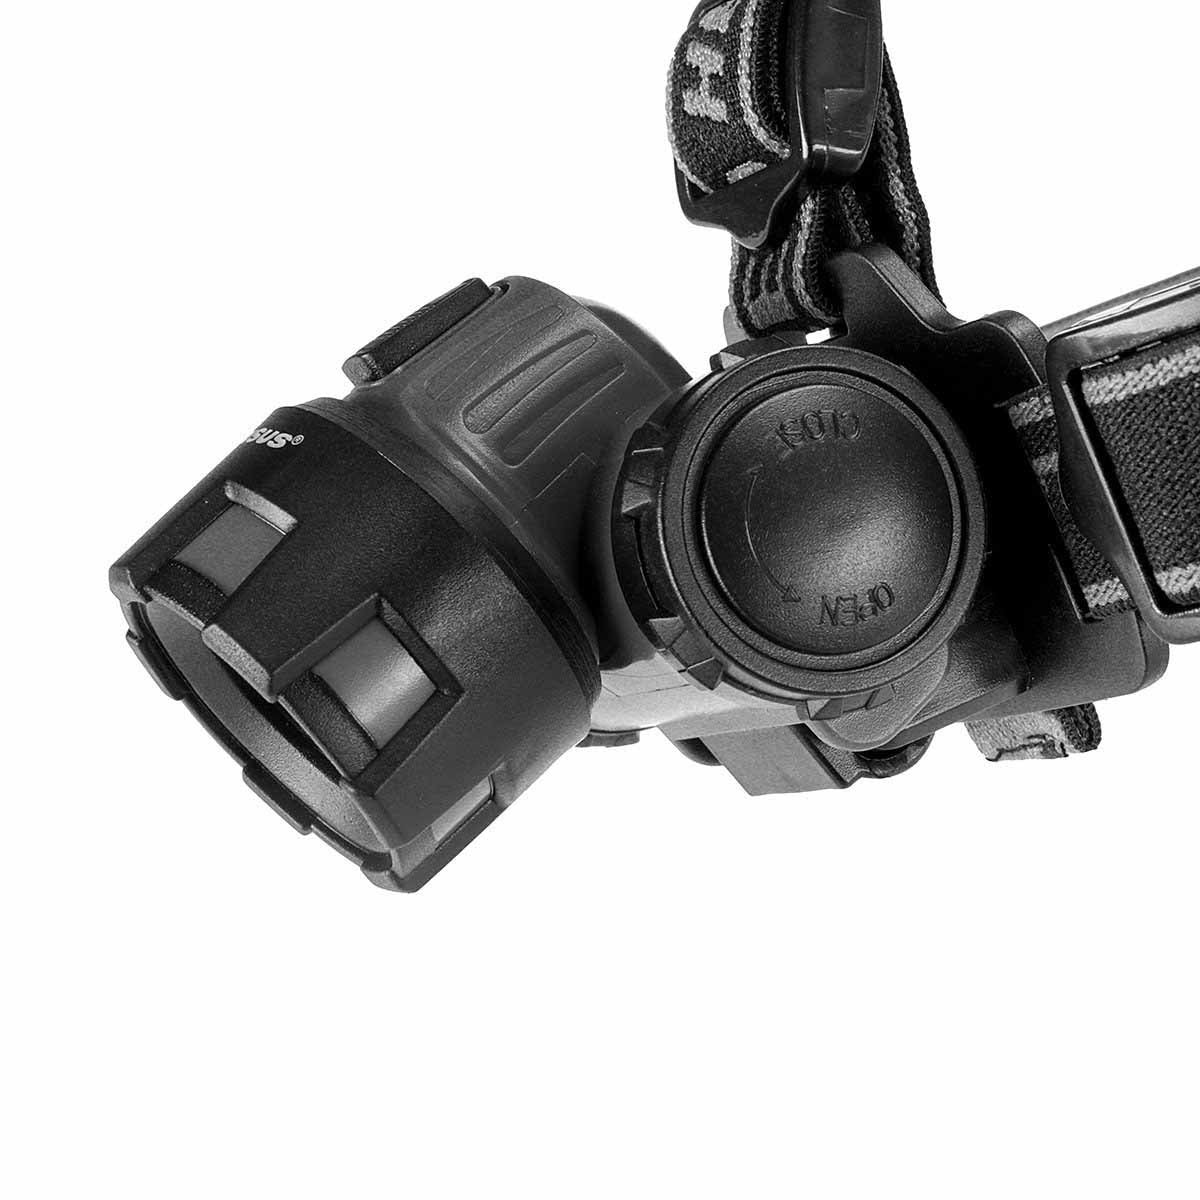 Portable LED Lightweight Headlamp for Camping open/close configuration